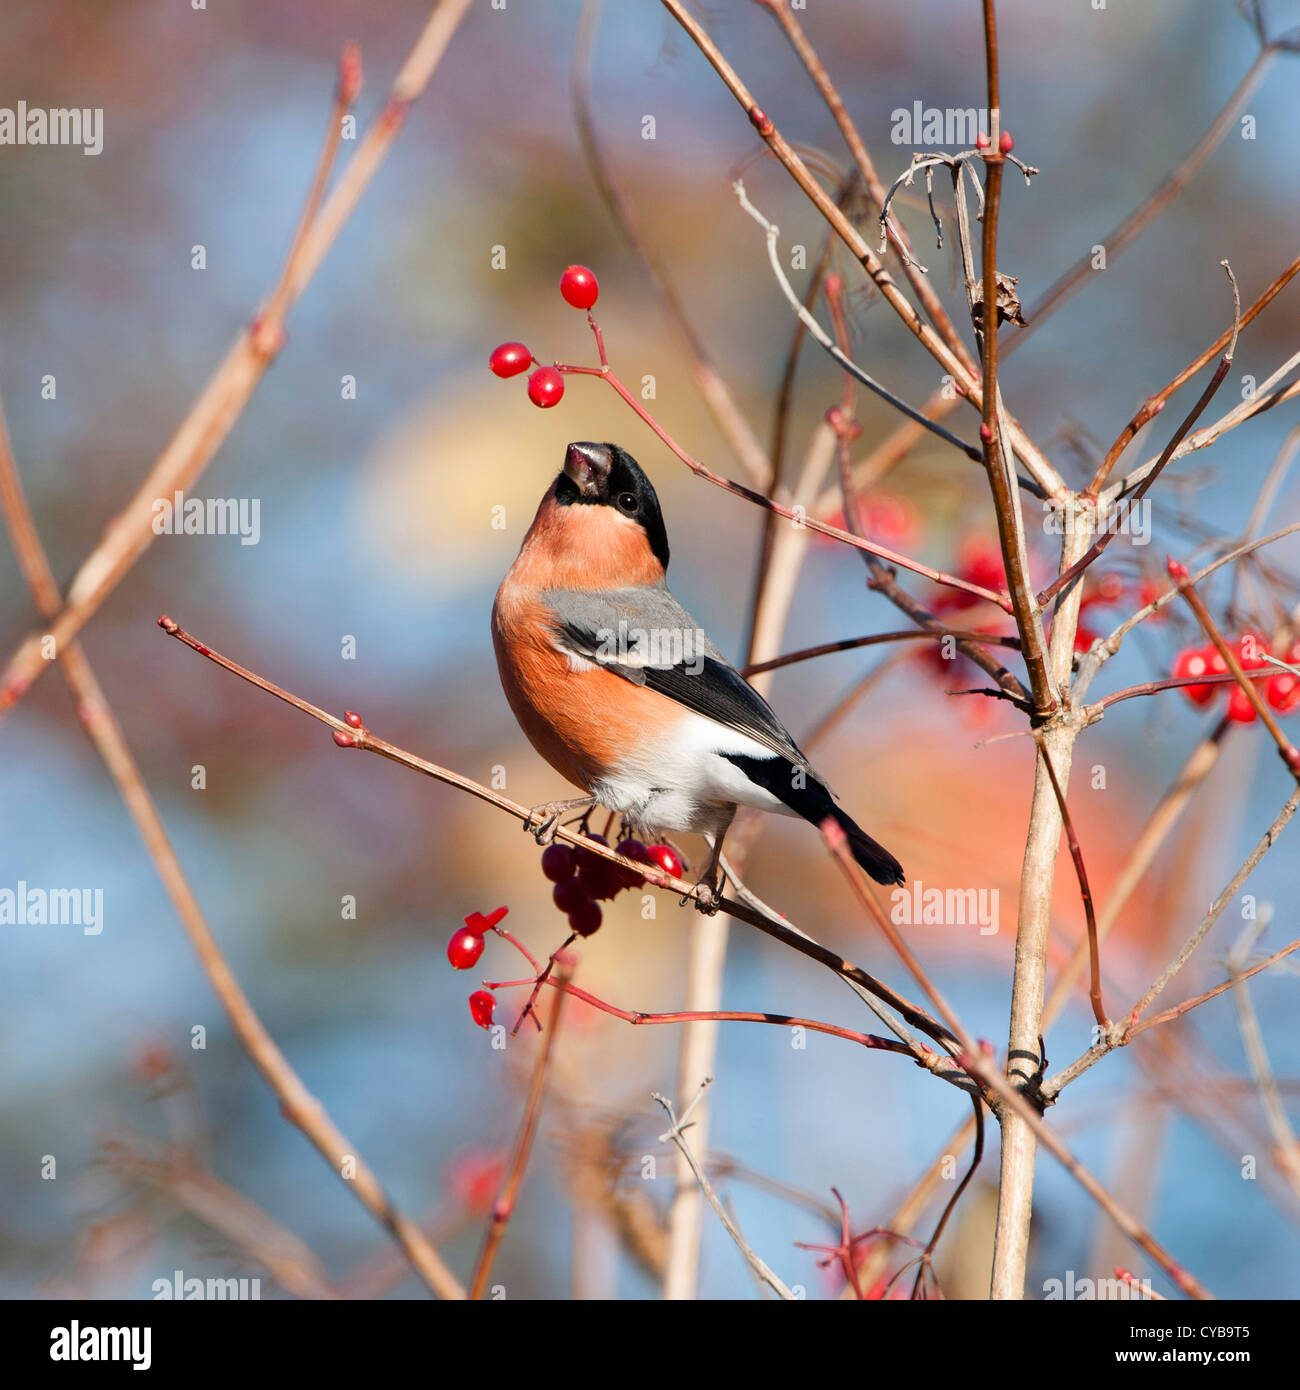 Bullfinch (Pyrrhula pyrrhula) separating (and eating) the seed from the fleshy berry of guilder rose and common buckththorn. Stock Photo